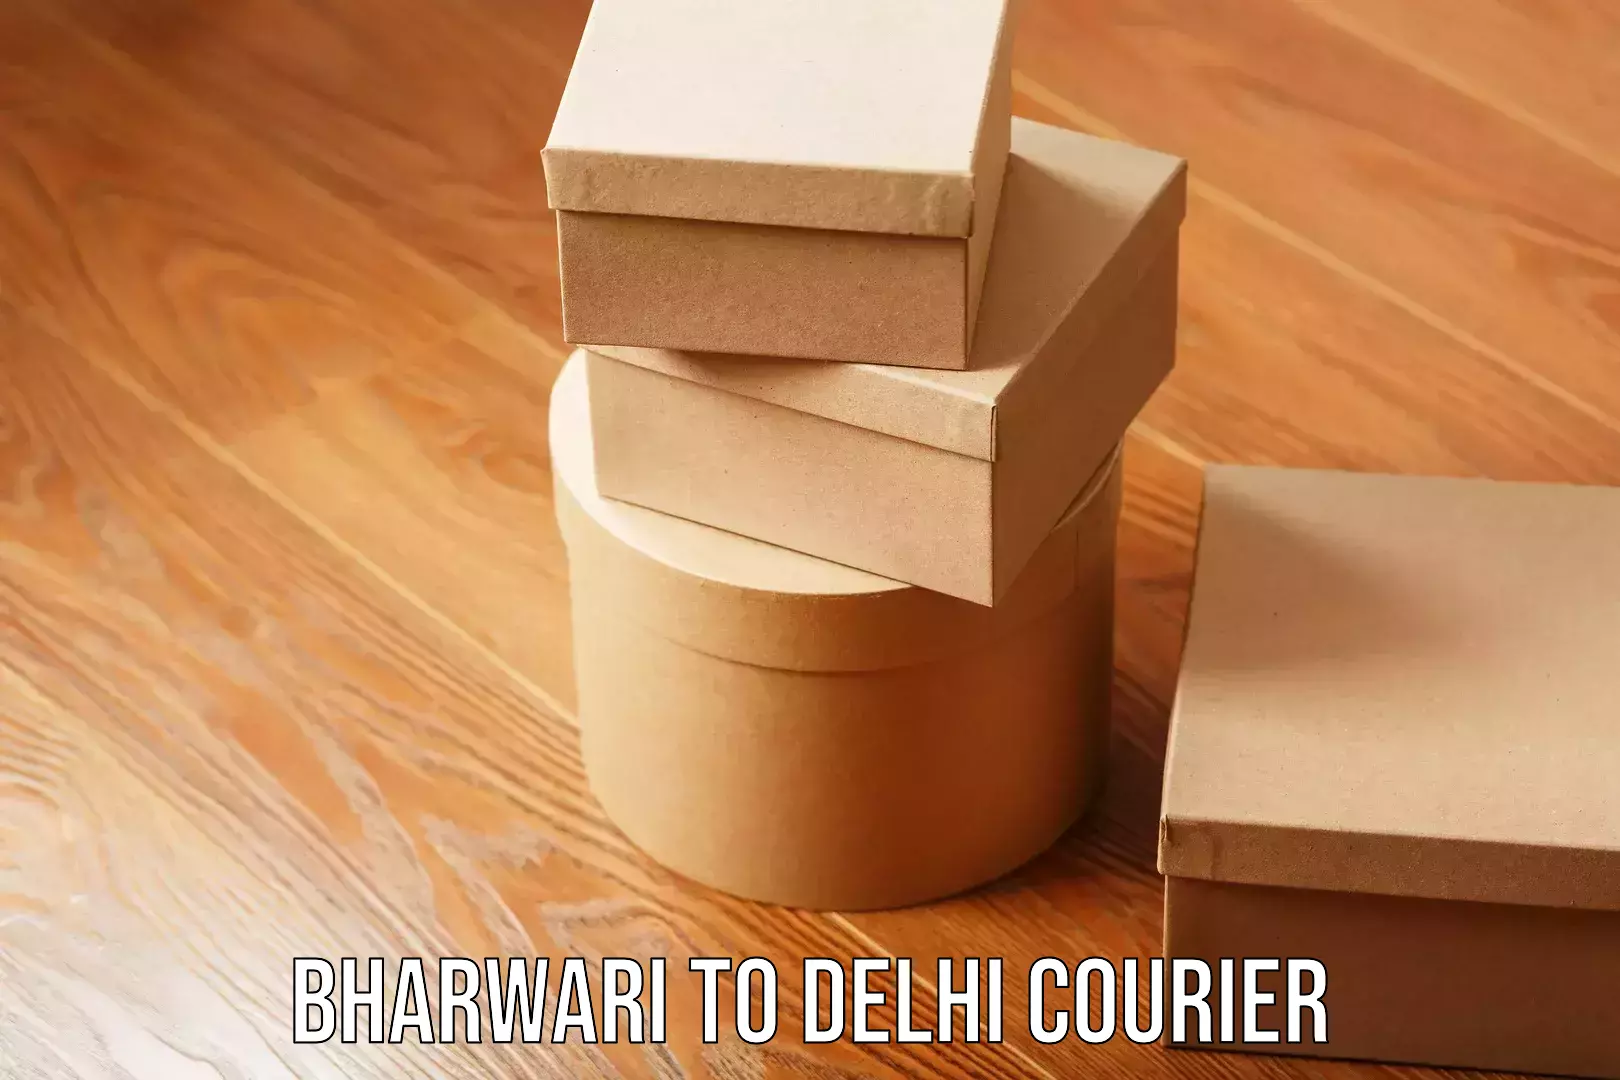 End-to-end delivery Bharwari to Delhi